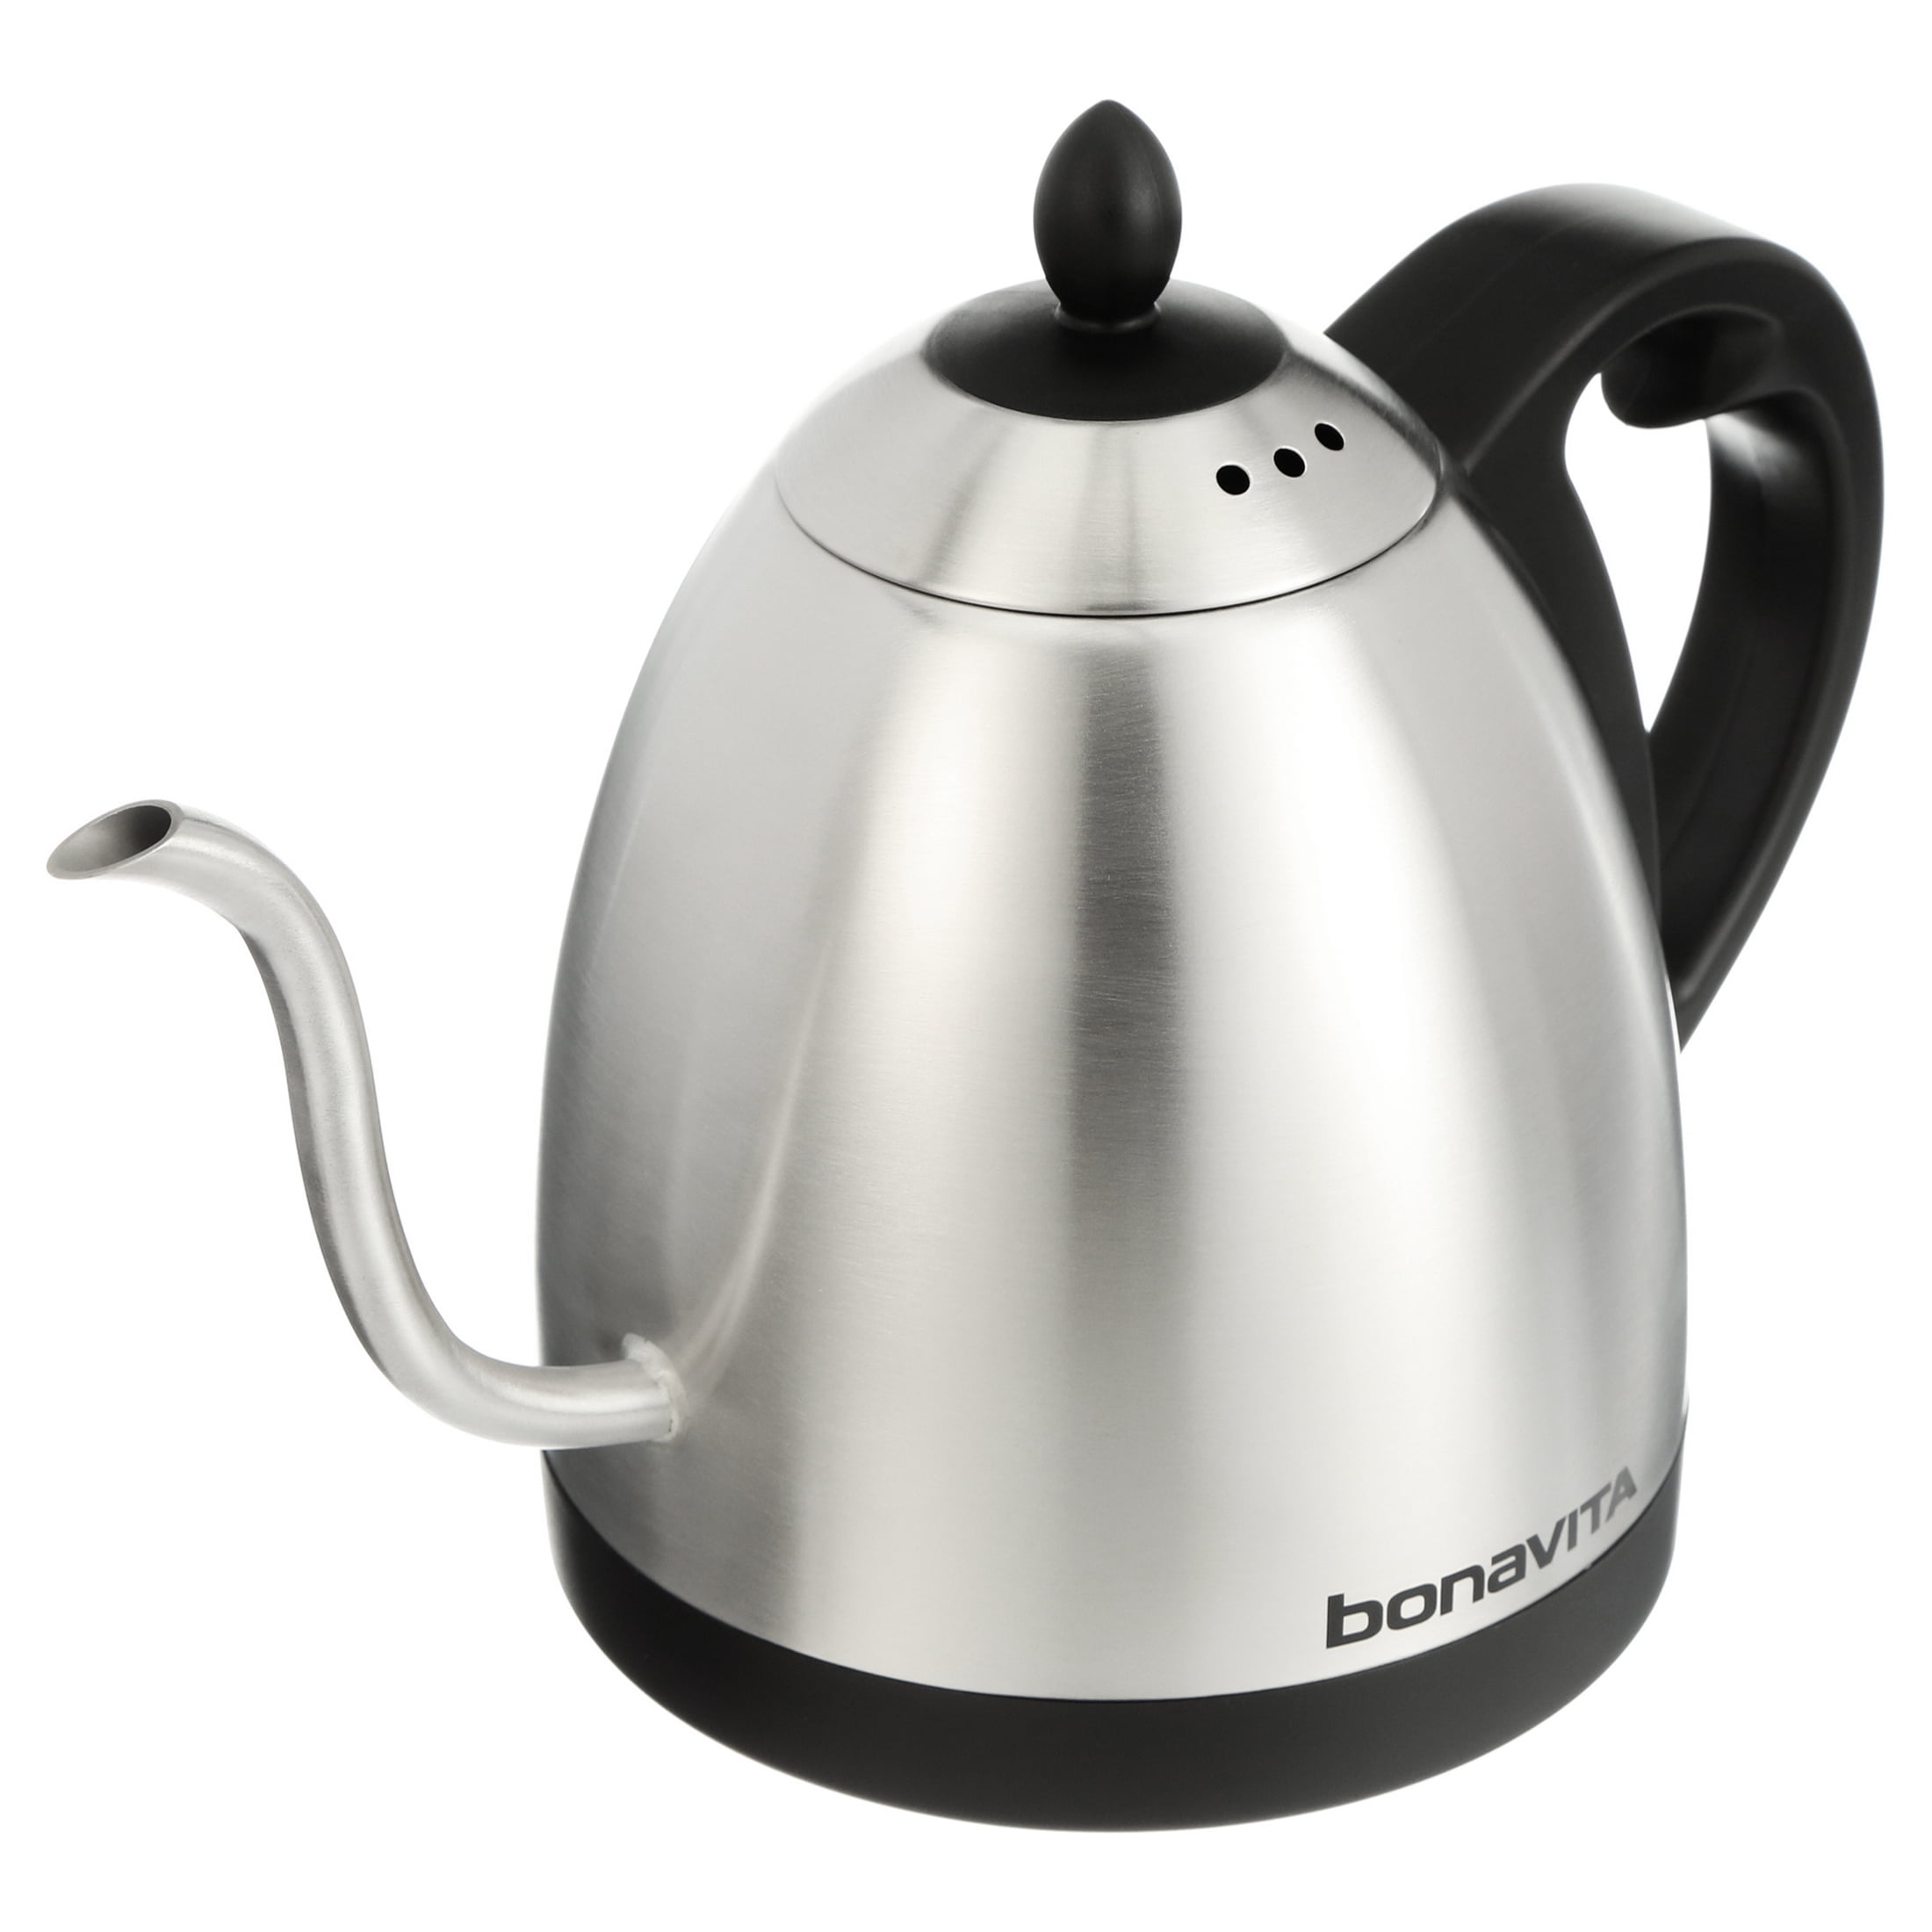  Bonavita 1L Digital Variable Temperature Gooseneck Electric  Kettle for Coffee Brew and Tea Precise Pour Control, 6 Preset Temps, Café  or Home Use, 1000 Watt, Stainless Steel: Home & Kitchen